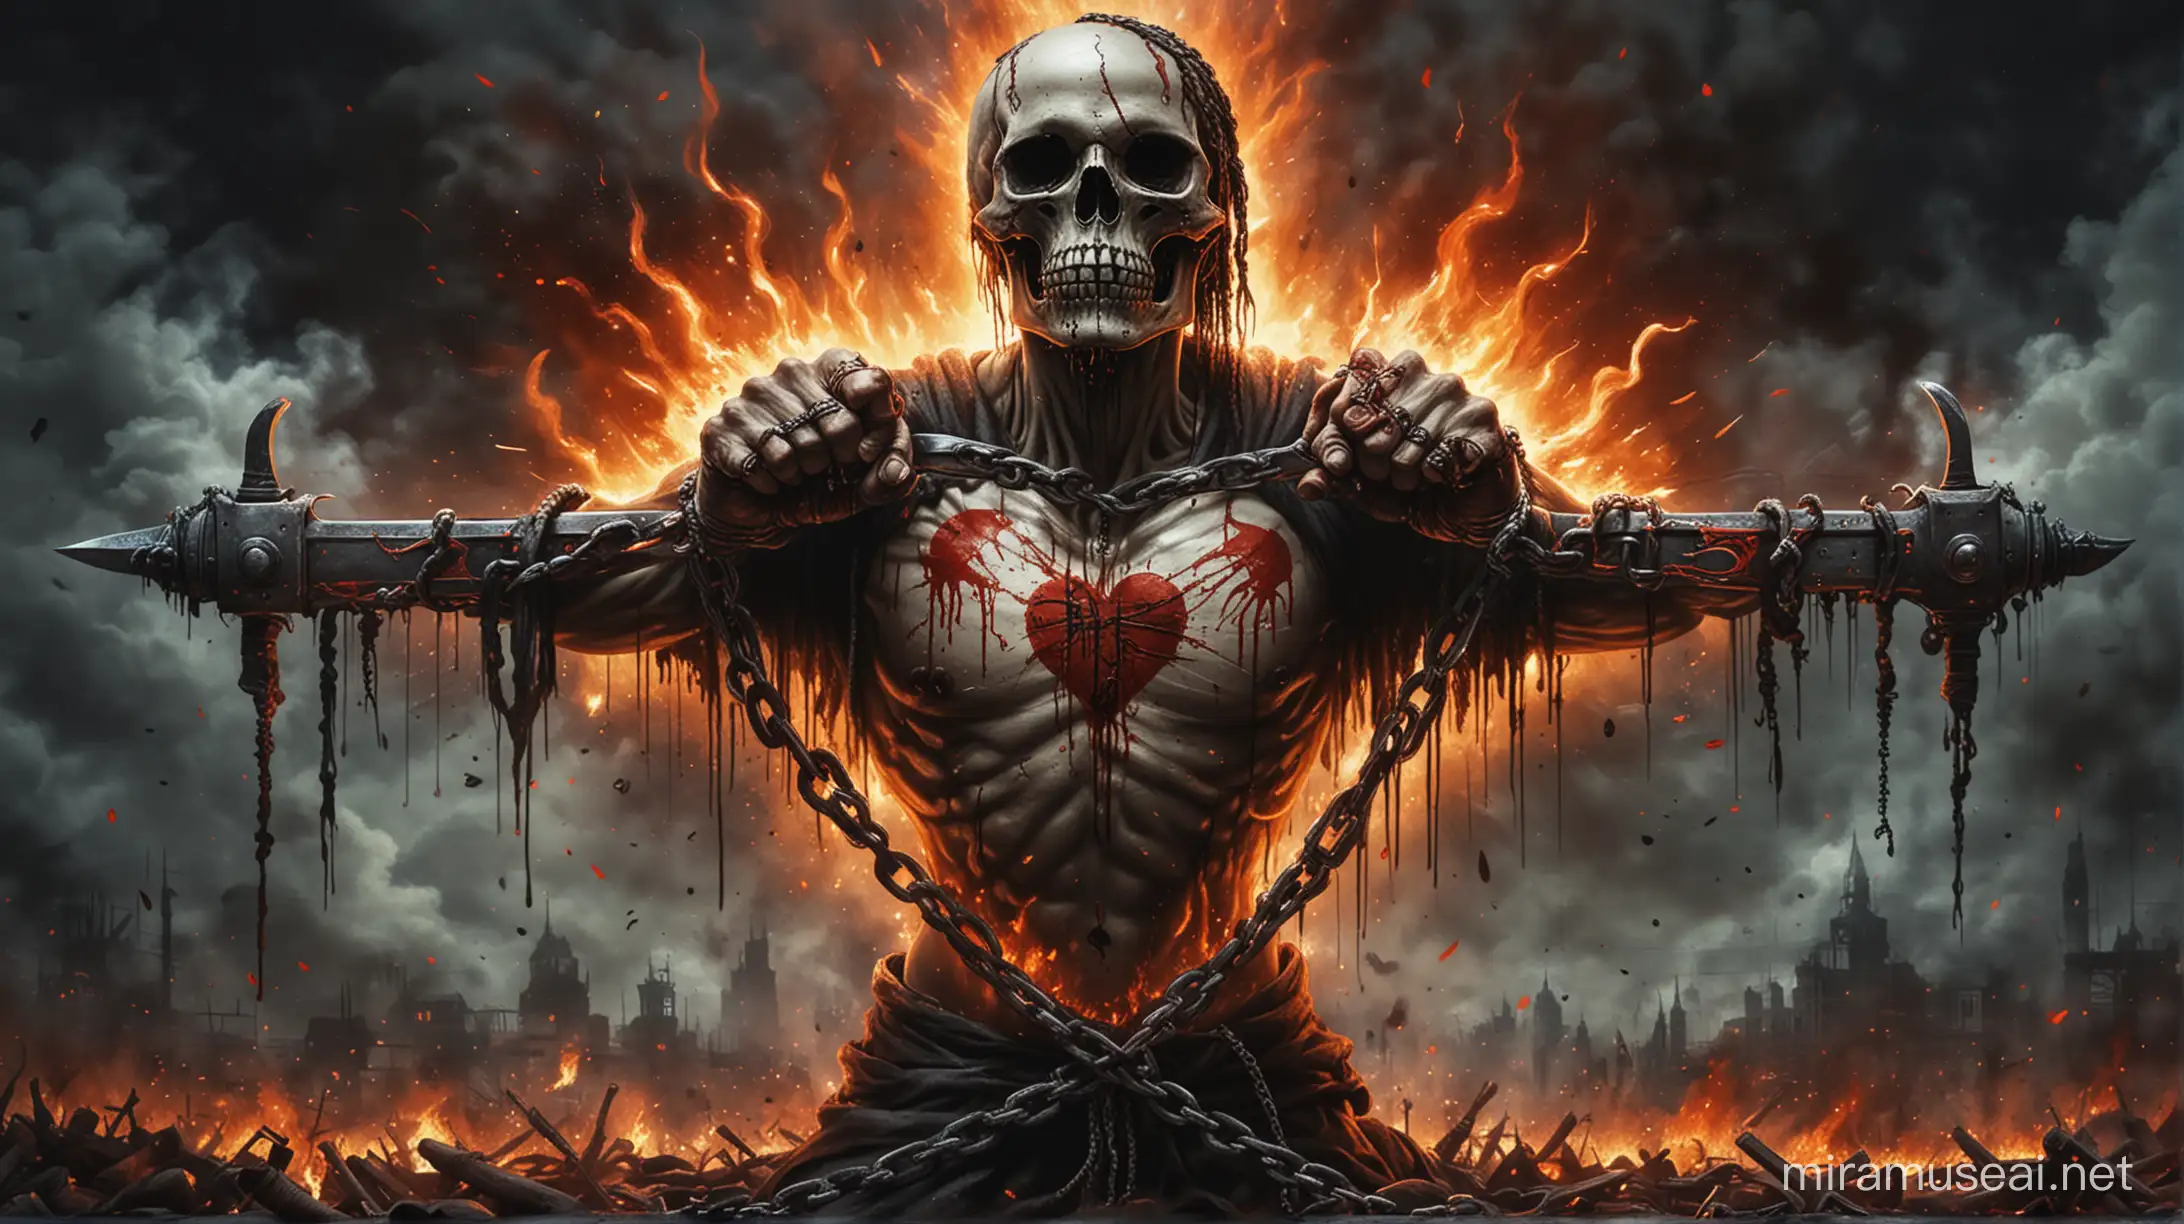 Bloody Hands Piercing Heart with Sword Symbolic Rebellion Art